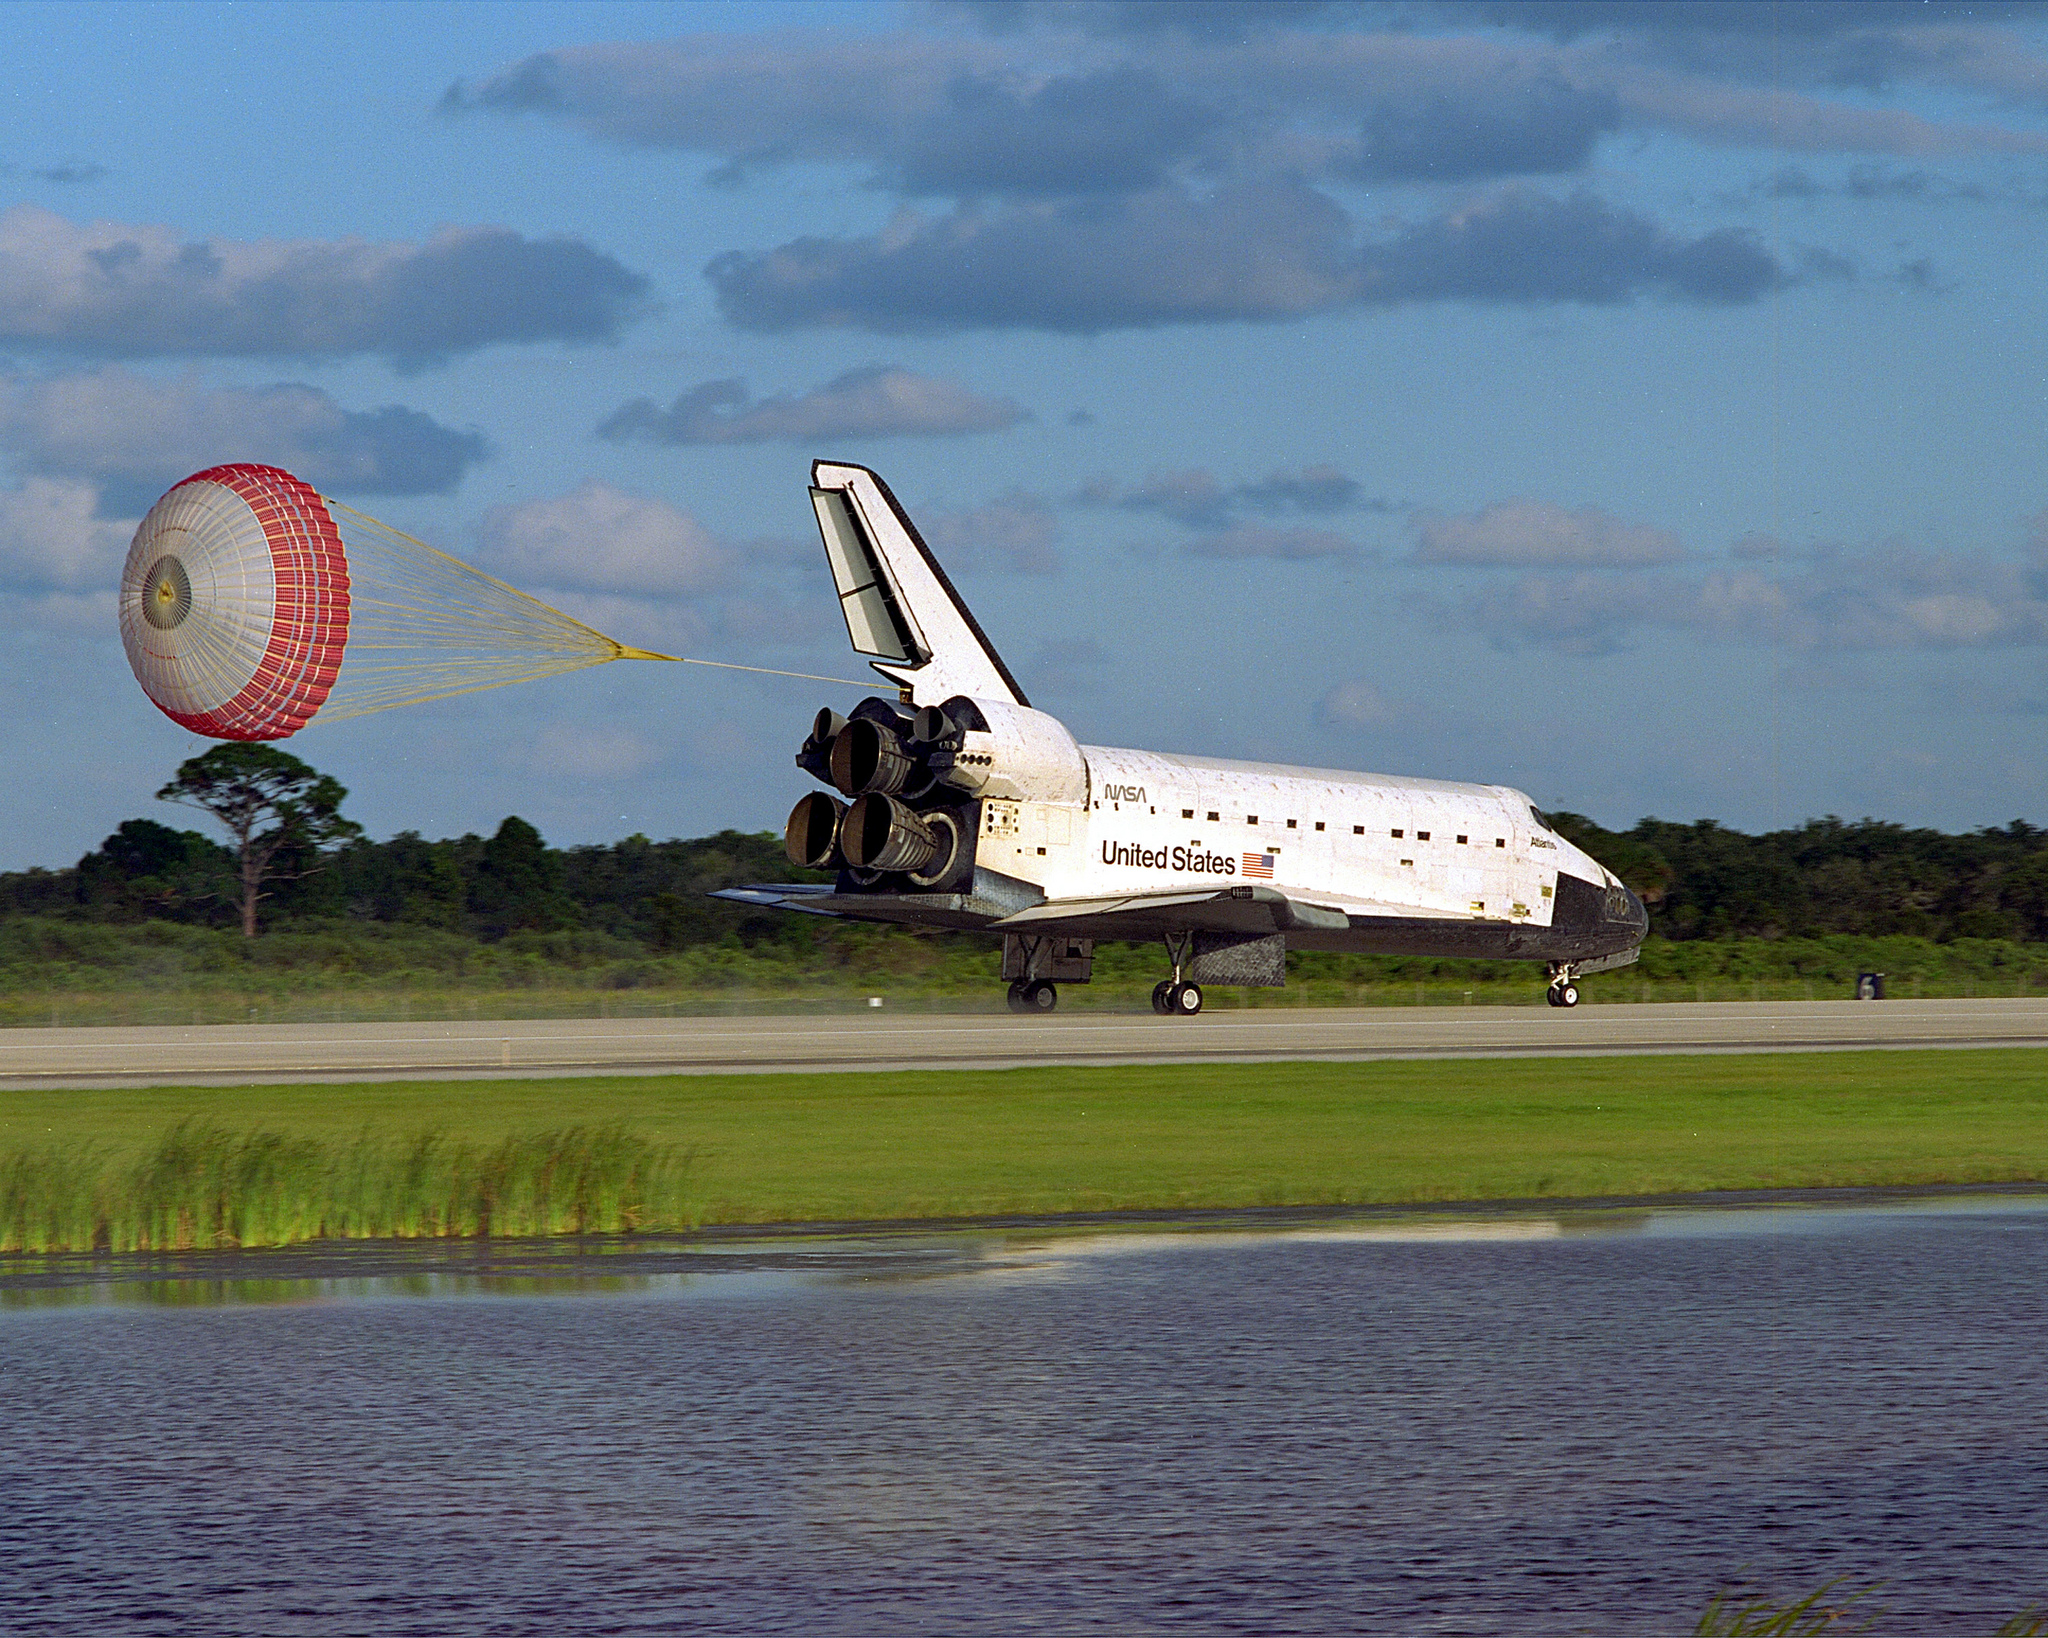 Atlantis lands on runway 15 of the Kennedy Space Center